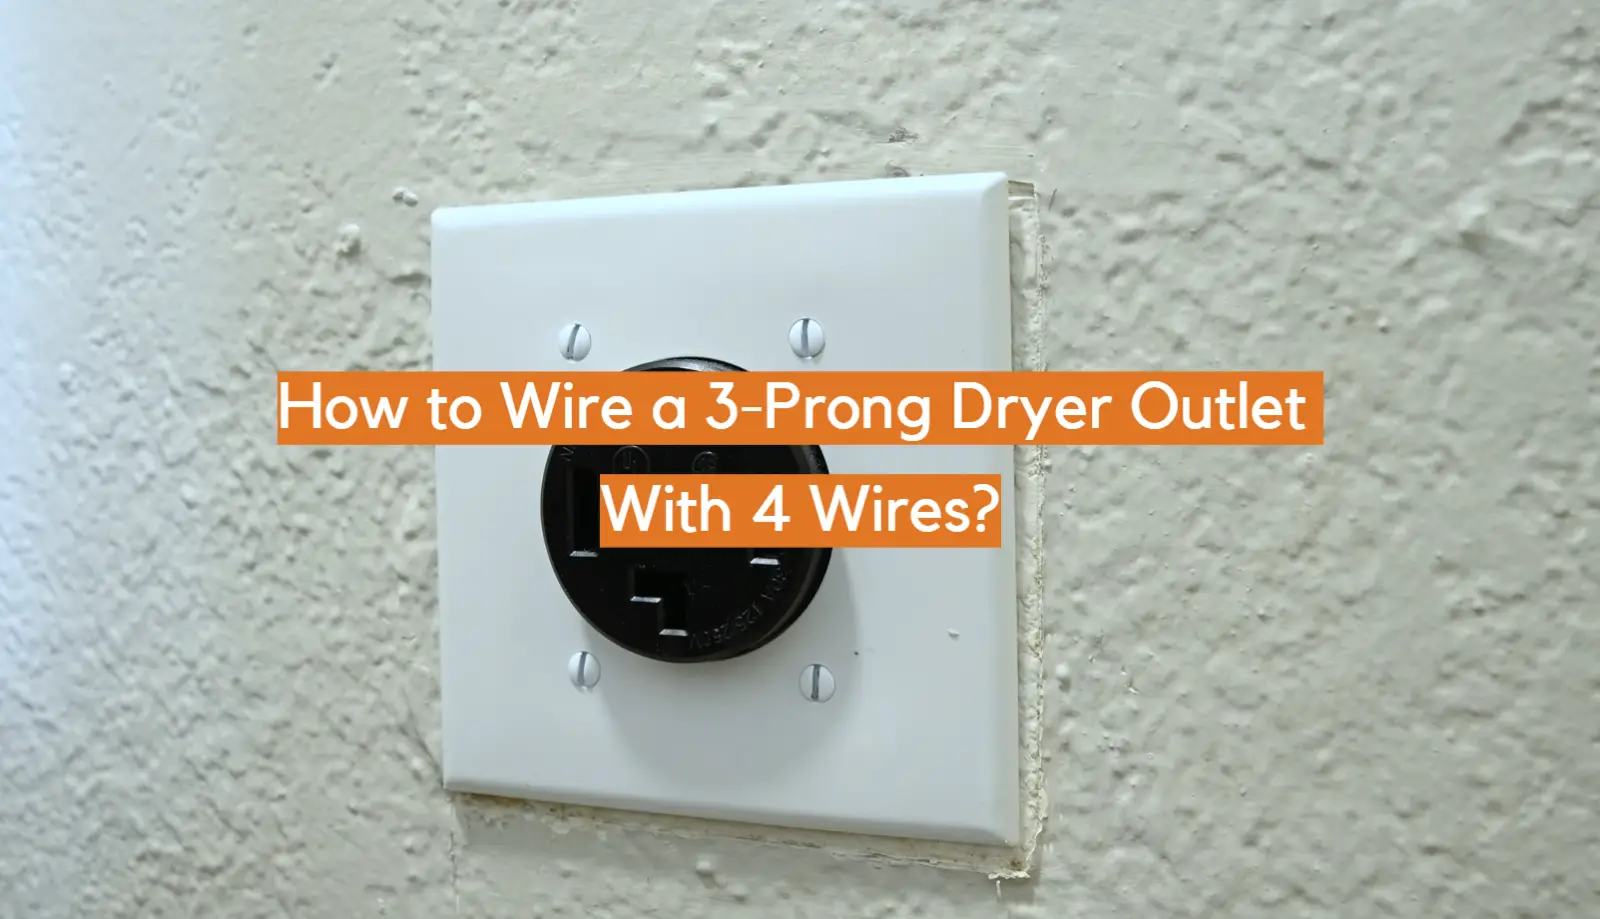 How to Wire a 3-Prong Dryer Outlet With 4 Wires?